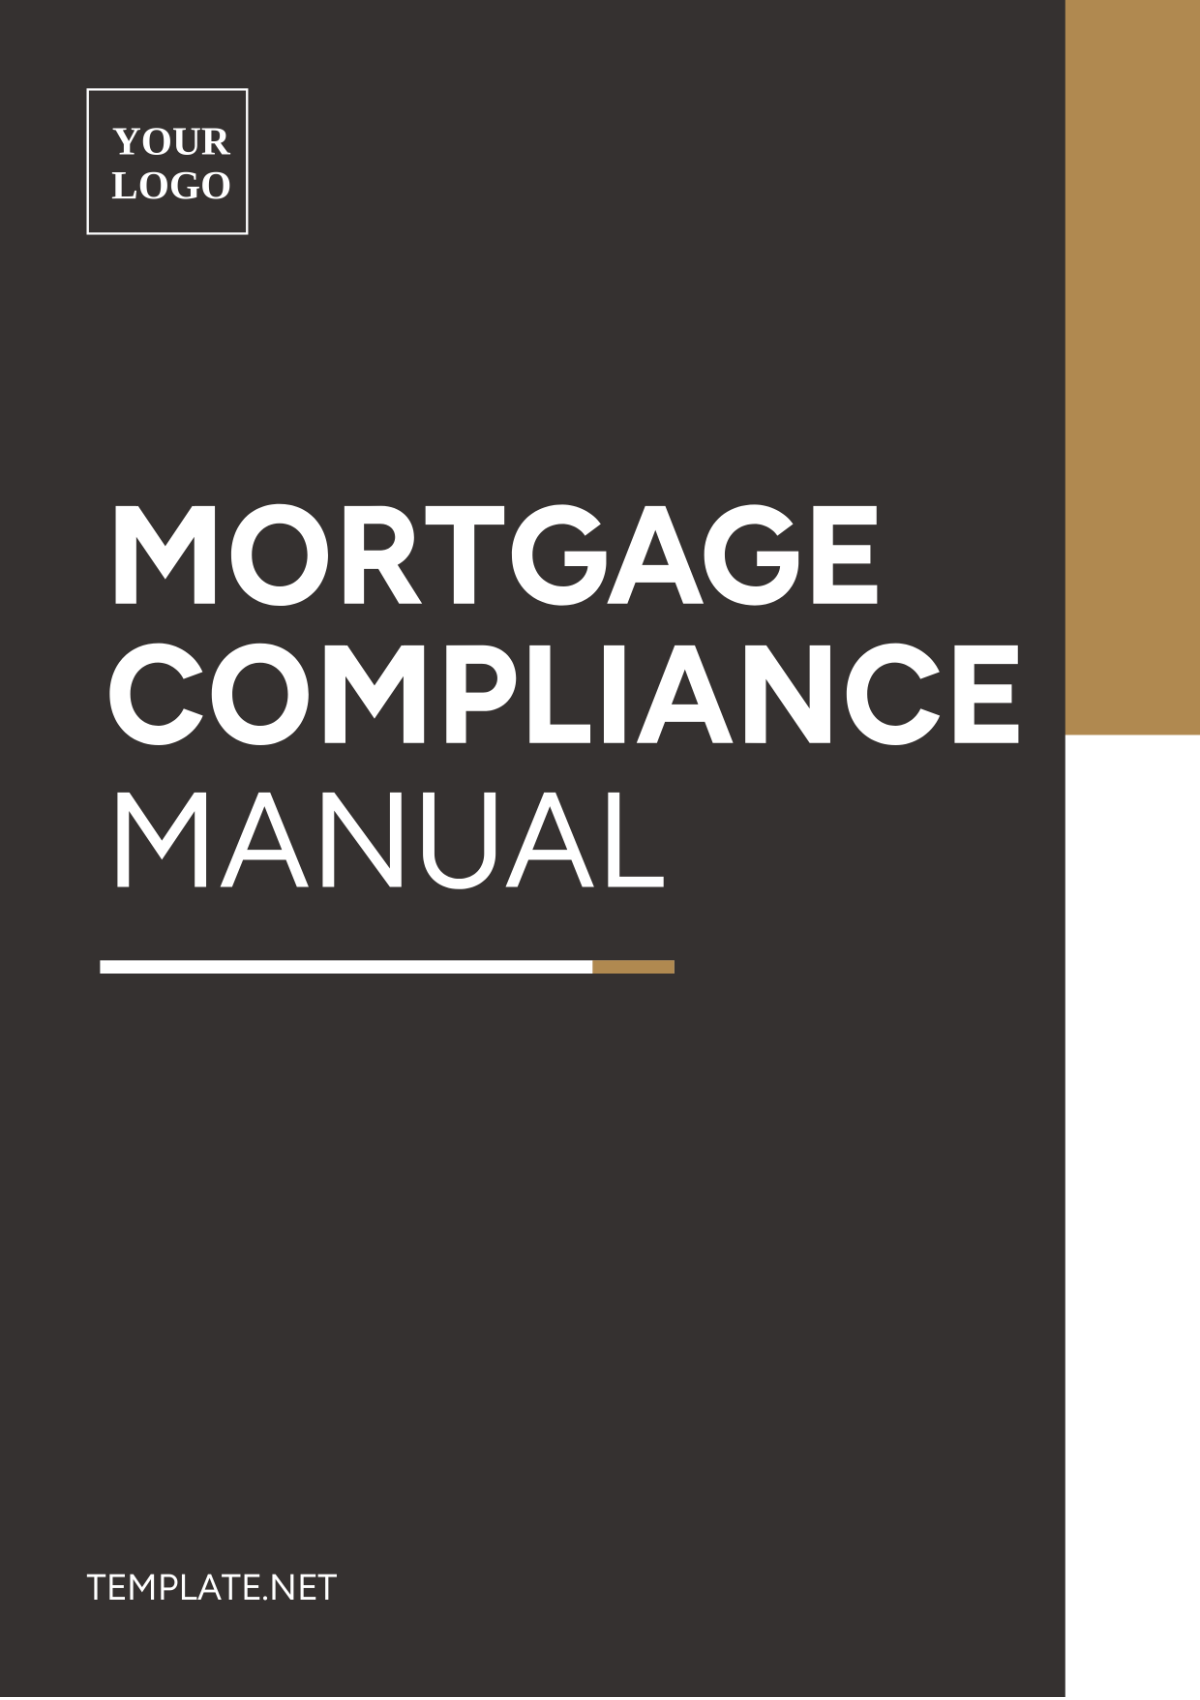 Mortgage Compliance Manual Template